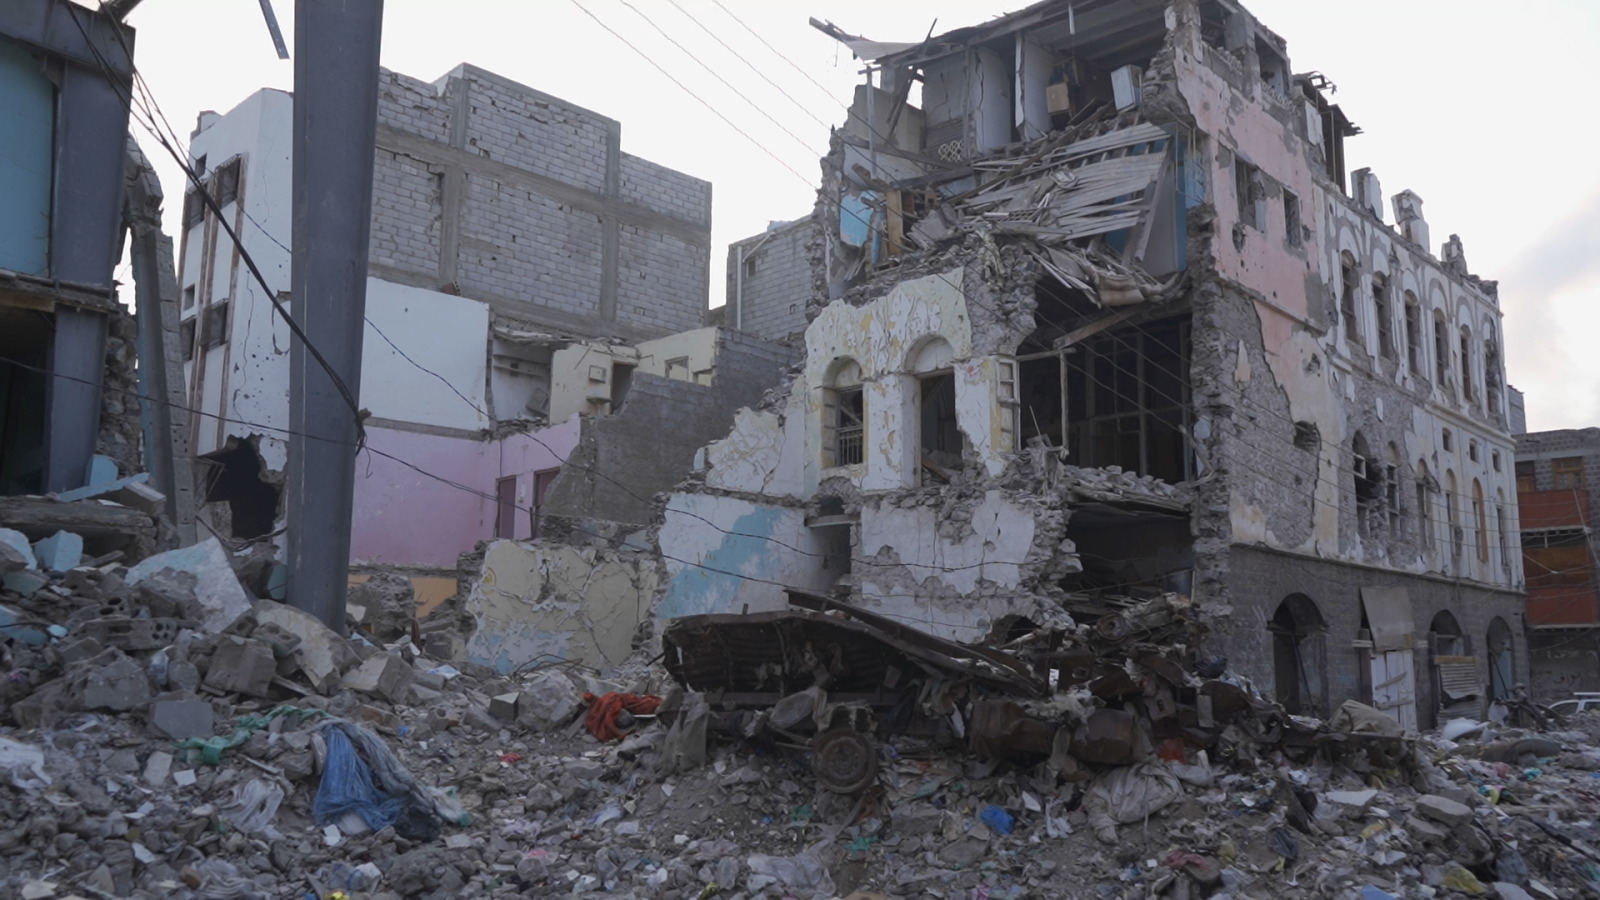 Heavy destruction in Aden, in the South of Yemen. The 7-year long war in Yemen war has caused the largest humanitarian crisis in the world. The level of destruction of infrastructure by massive bombing and shelling in populated areas, as well as the contamination by explosive devices are enormous challenges to overcome. 